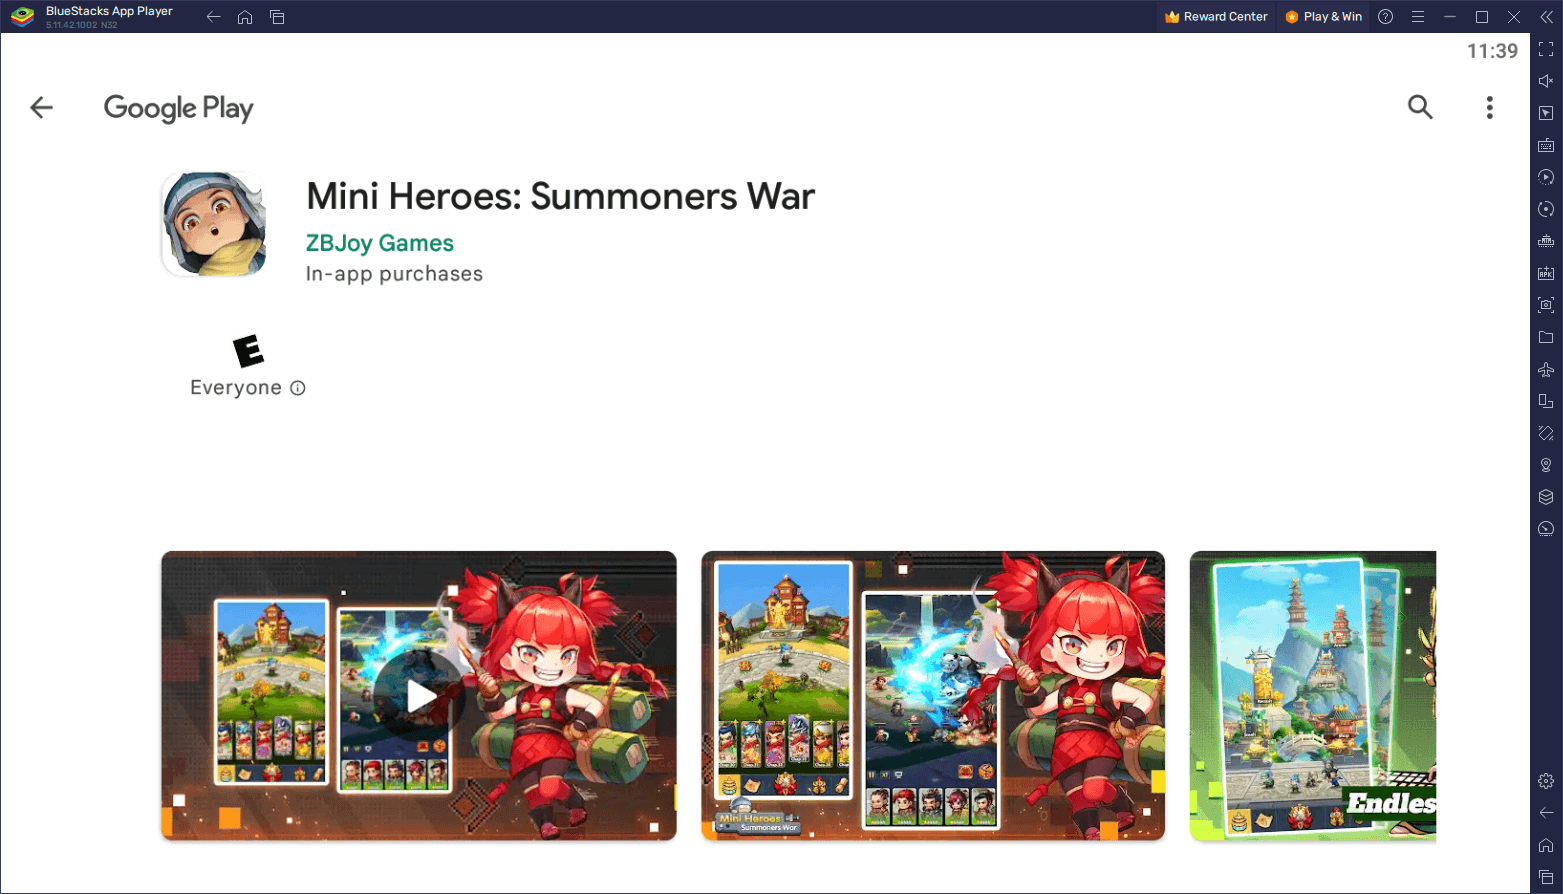 How to Play Mini Heroes: Summoners War on PC With BlueStacks